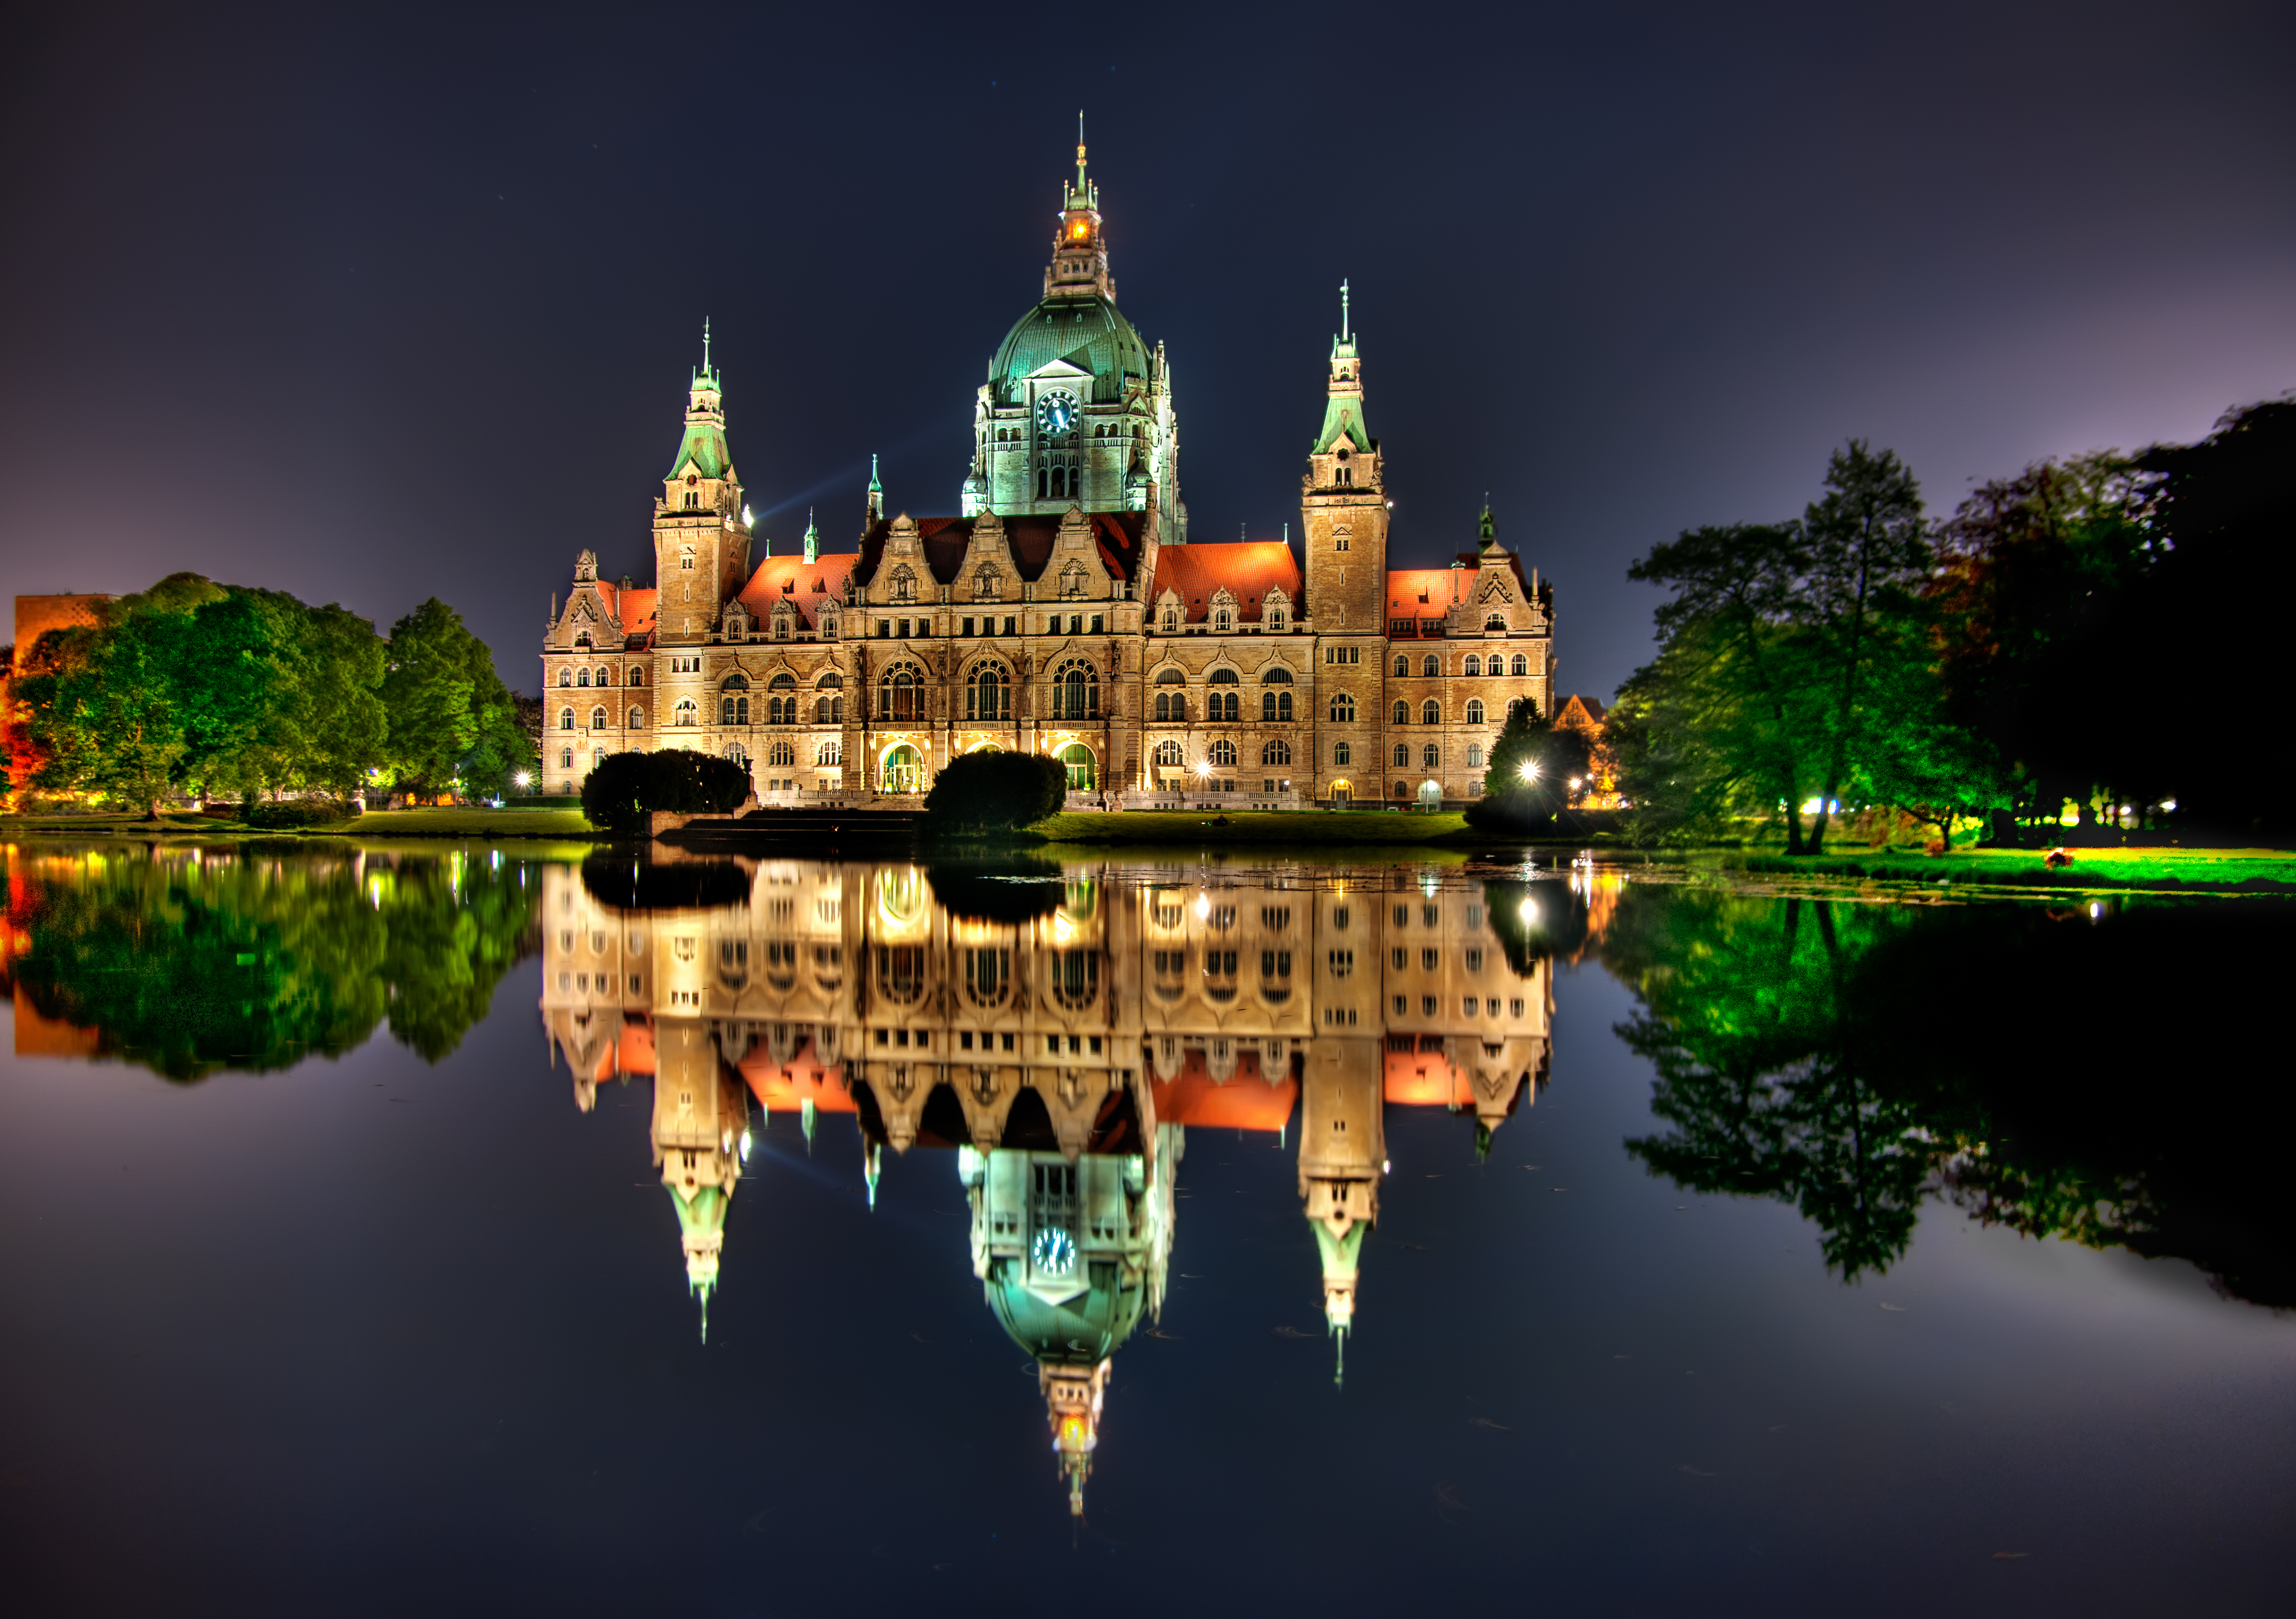 The glowing building is reflected in the lake at evening time